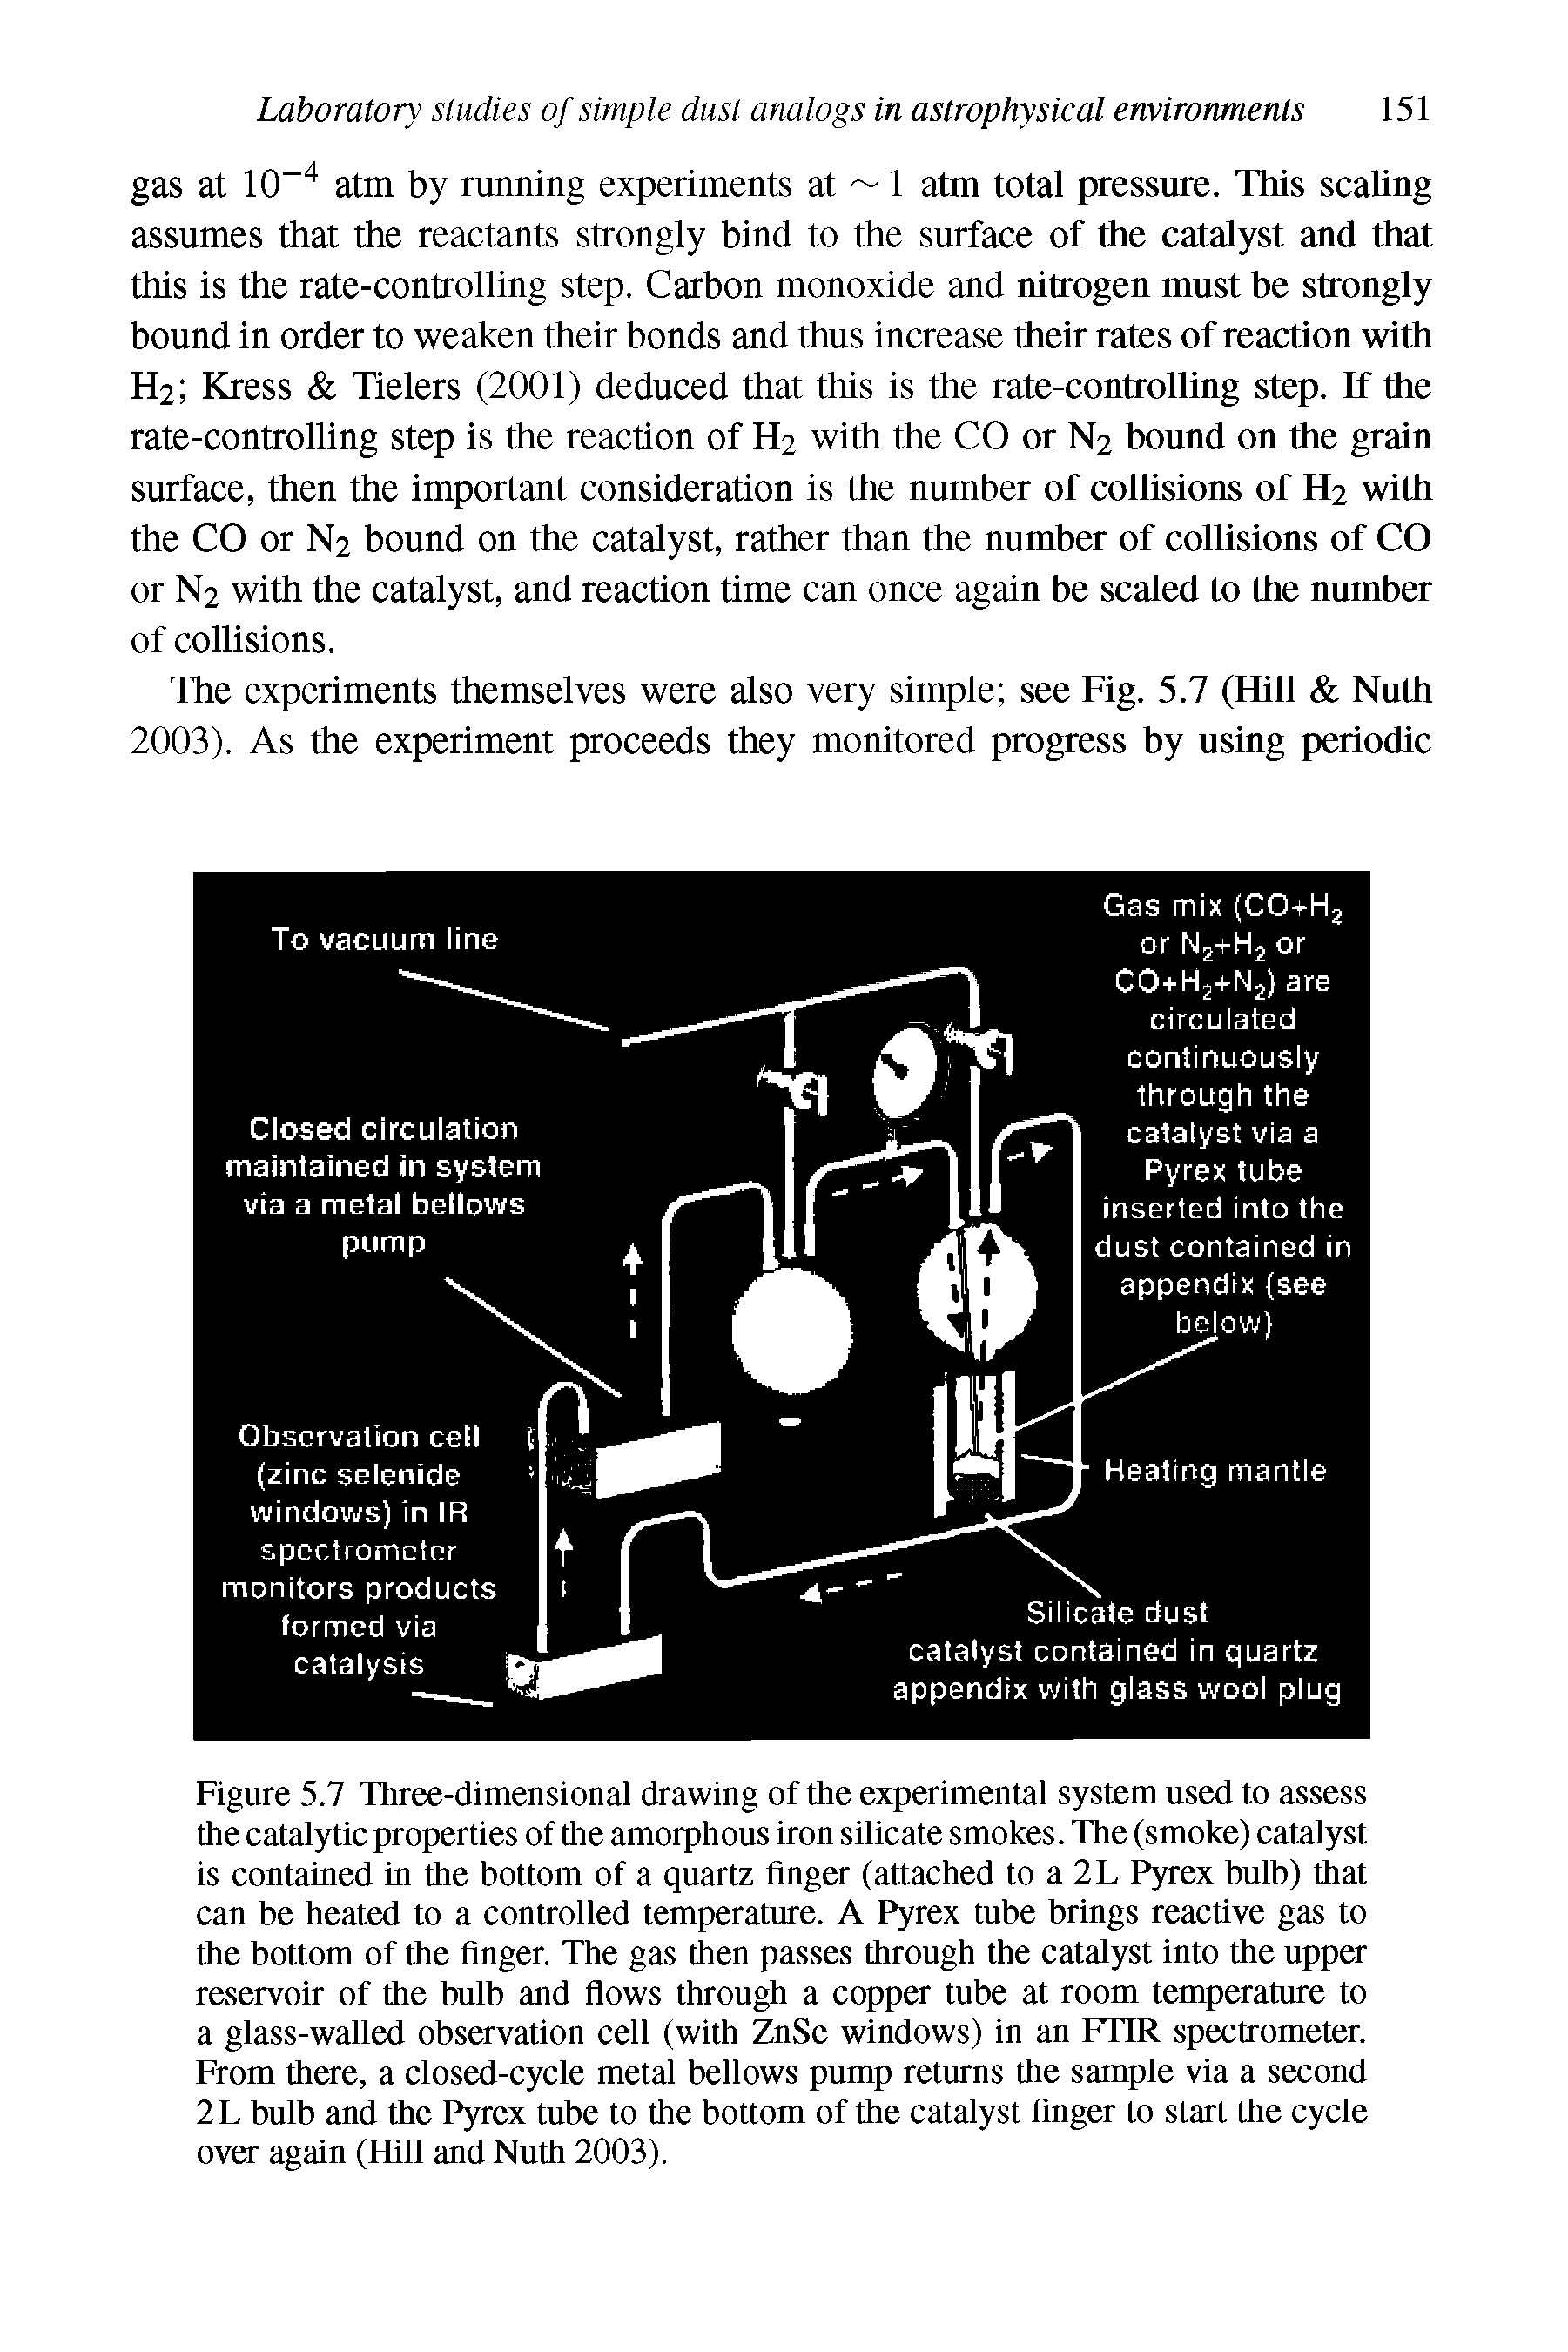 Figure 5.7 Three-dimensional drawing of the experimental system used to assess the catalytic properties of the amorphous iron silicate smokes. The (smoke) catalyst is contained in the bottom of a quartz finger (attached to a 2L Pyrex bulb) that can be heated to a controlled temperature. A Pyrex tube brings reactive gas to the bottom of the finger. The gas then passes through the catalyst into the upper reservoir of the bulb and flows through a copper tube at room temperature to a glass-walled observation cell (with ZnSe windows) in an P iiR spectrometer. From there, a closed-cycle metal bellows pump returns the sample via a second 2L bulb and the Pyrex tube to the bottom of the catalyst finger to start the cycle over again (Hill and Nuth 2003).